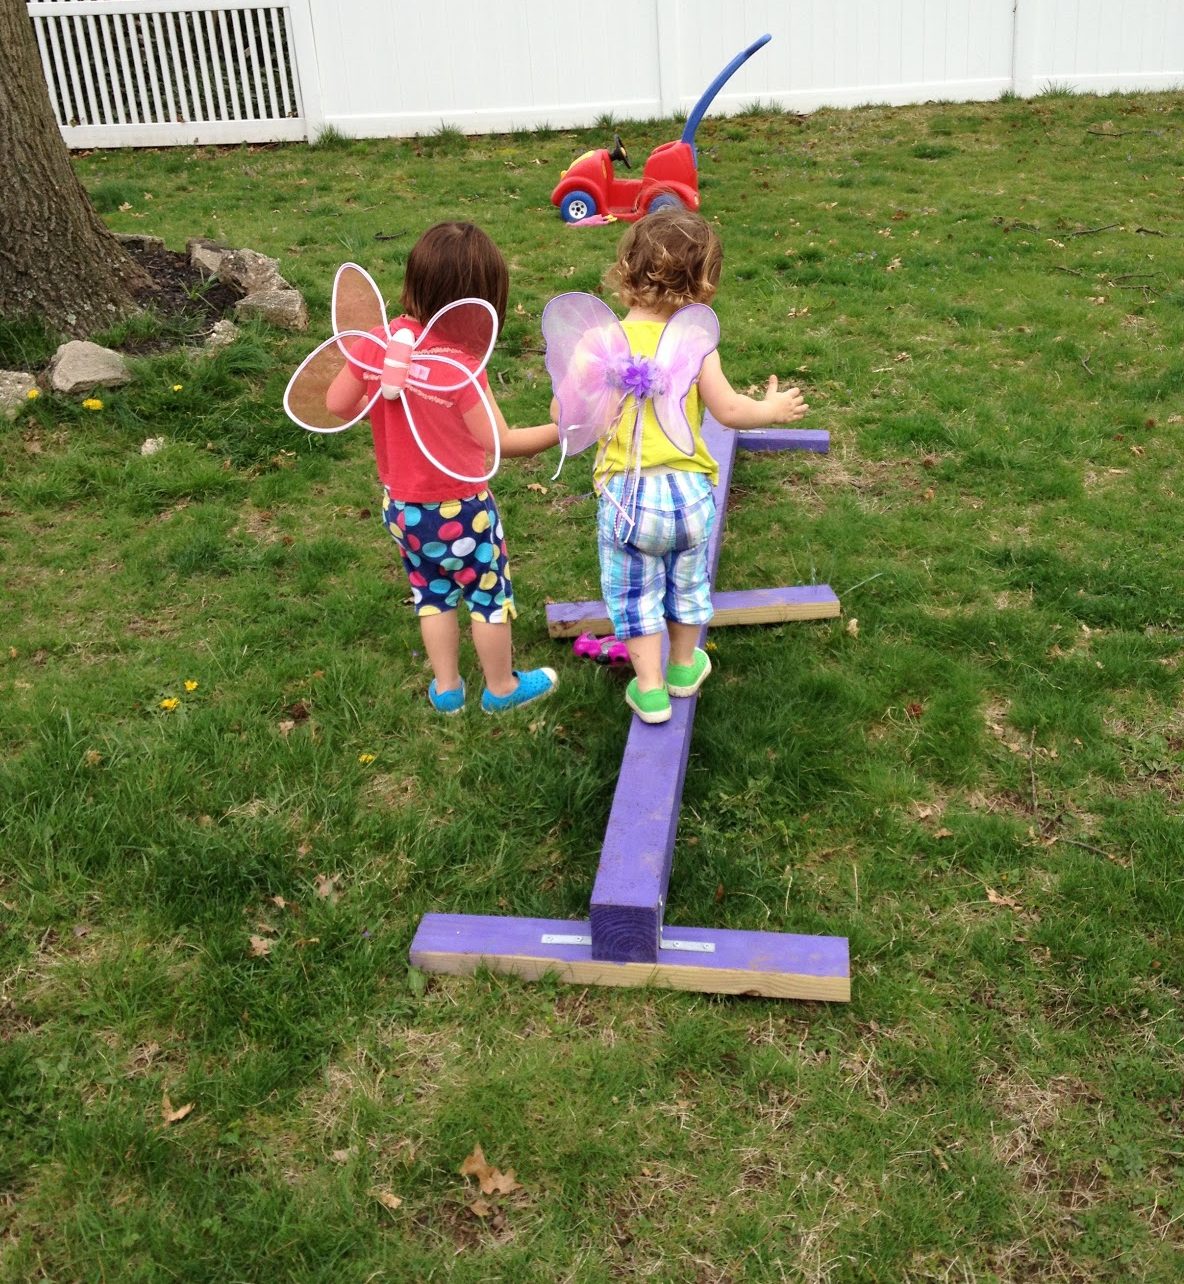 Kids trying out the DIY balance beam in purple colour